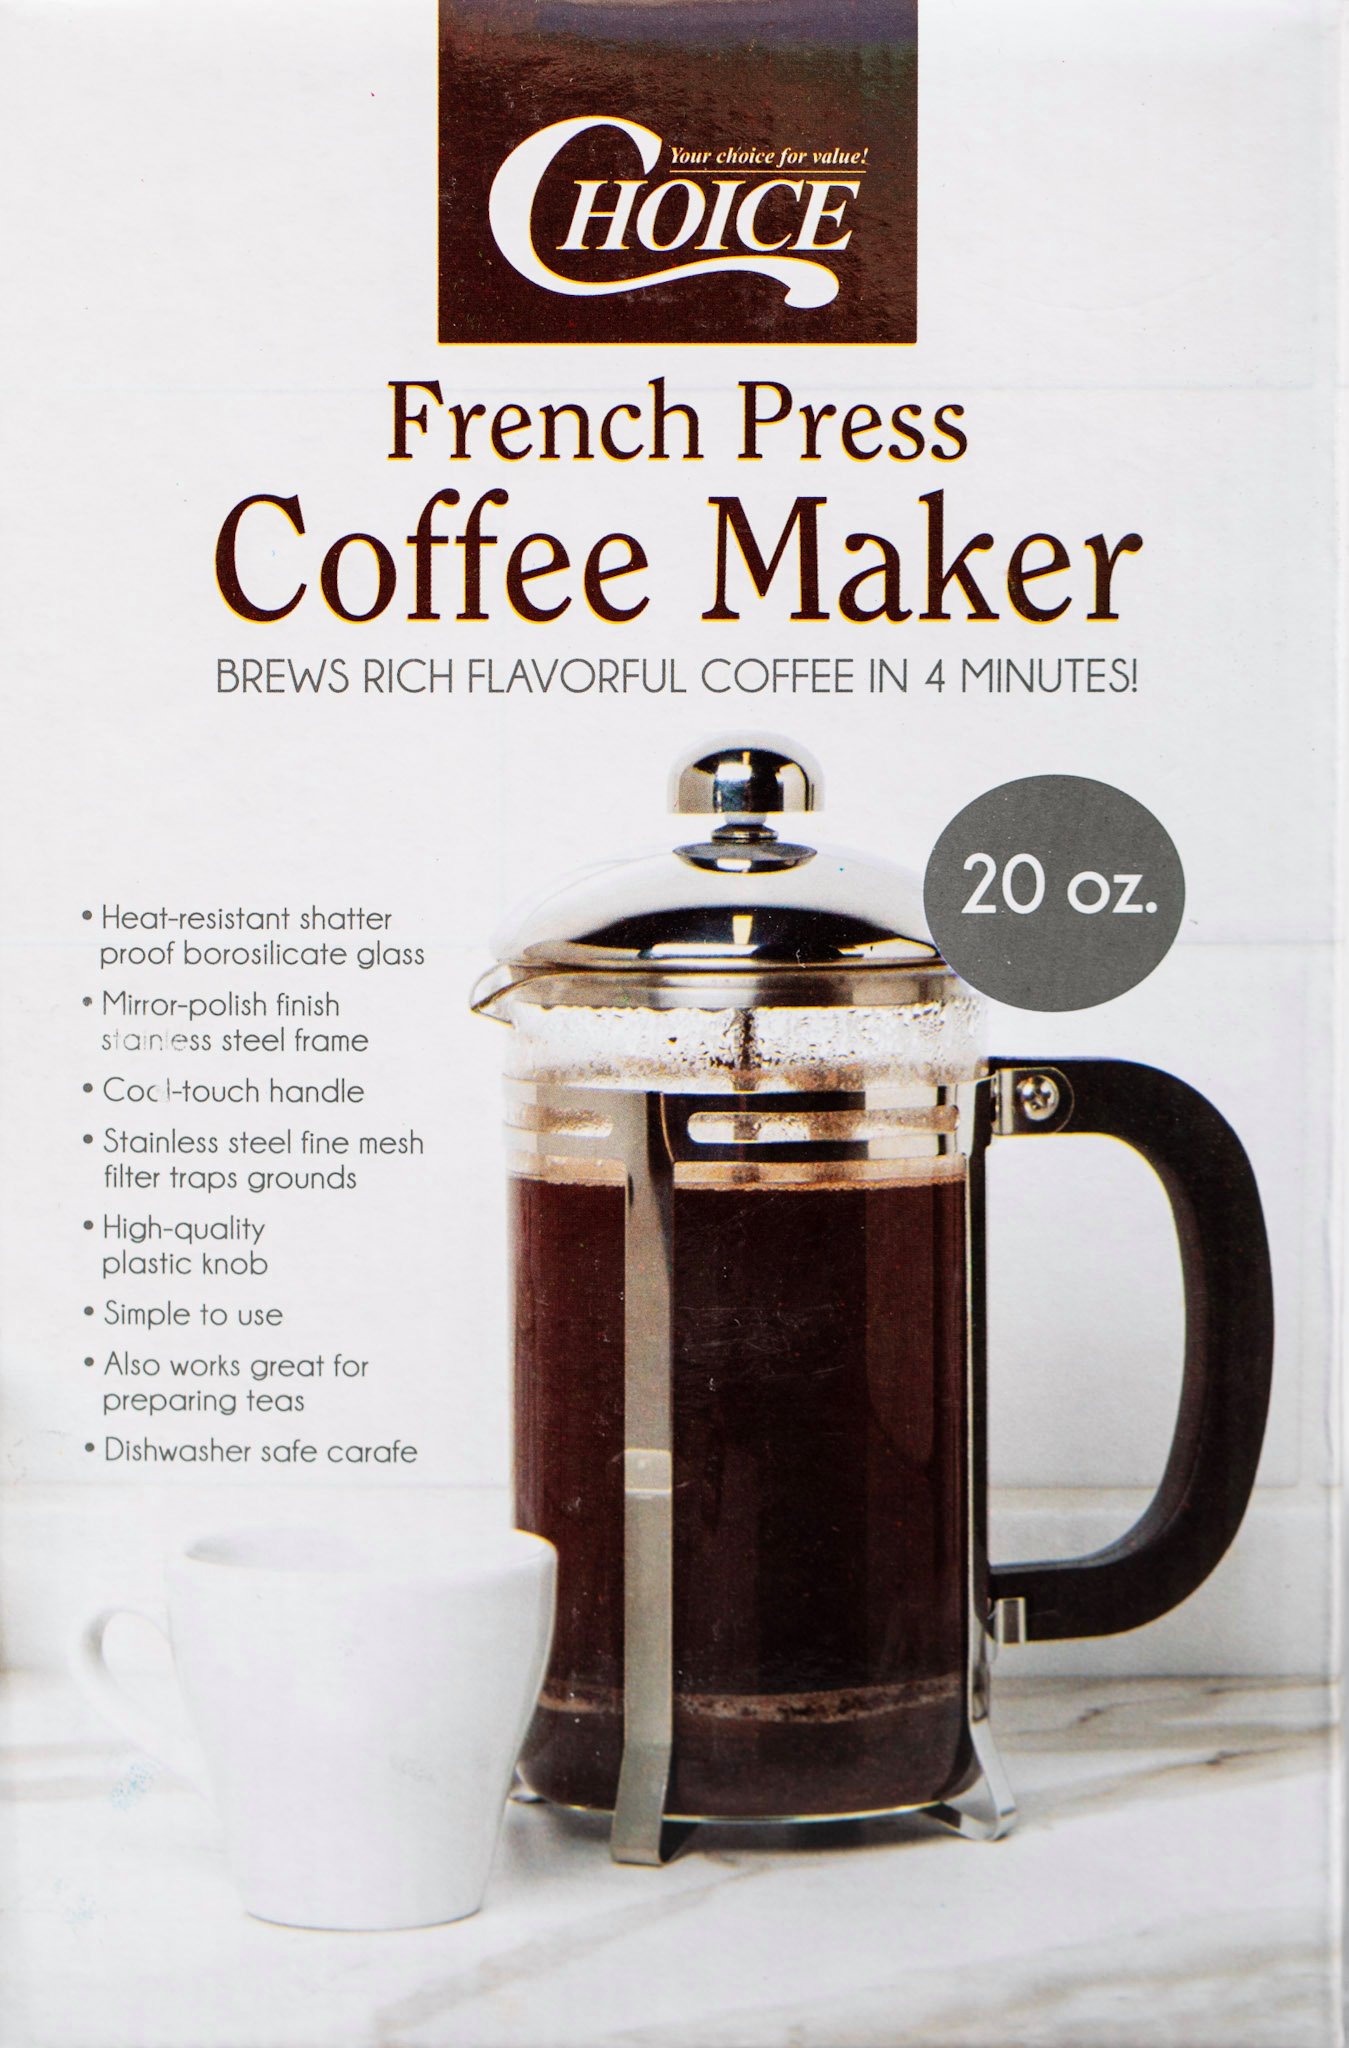 https://moderngrindcoffee.com/wp-content/uploads/2023/01/French-Press-Package-3.jpg